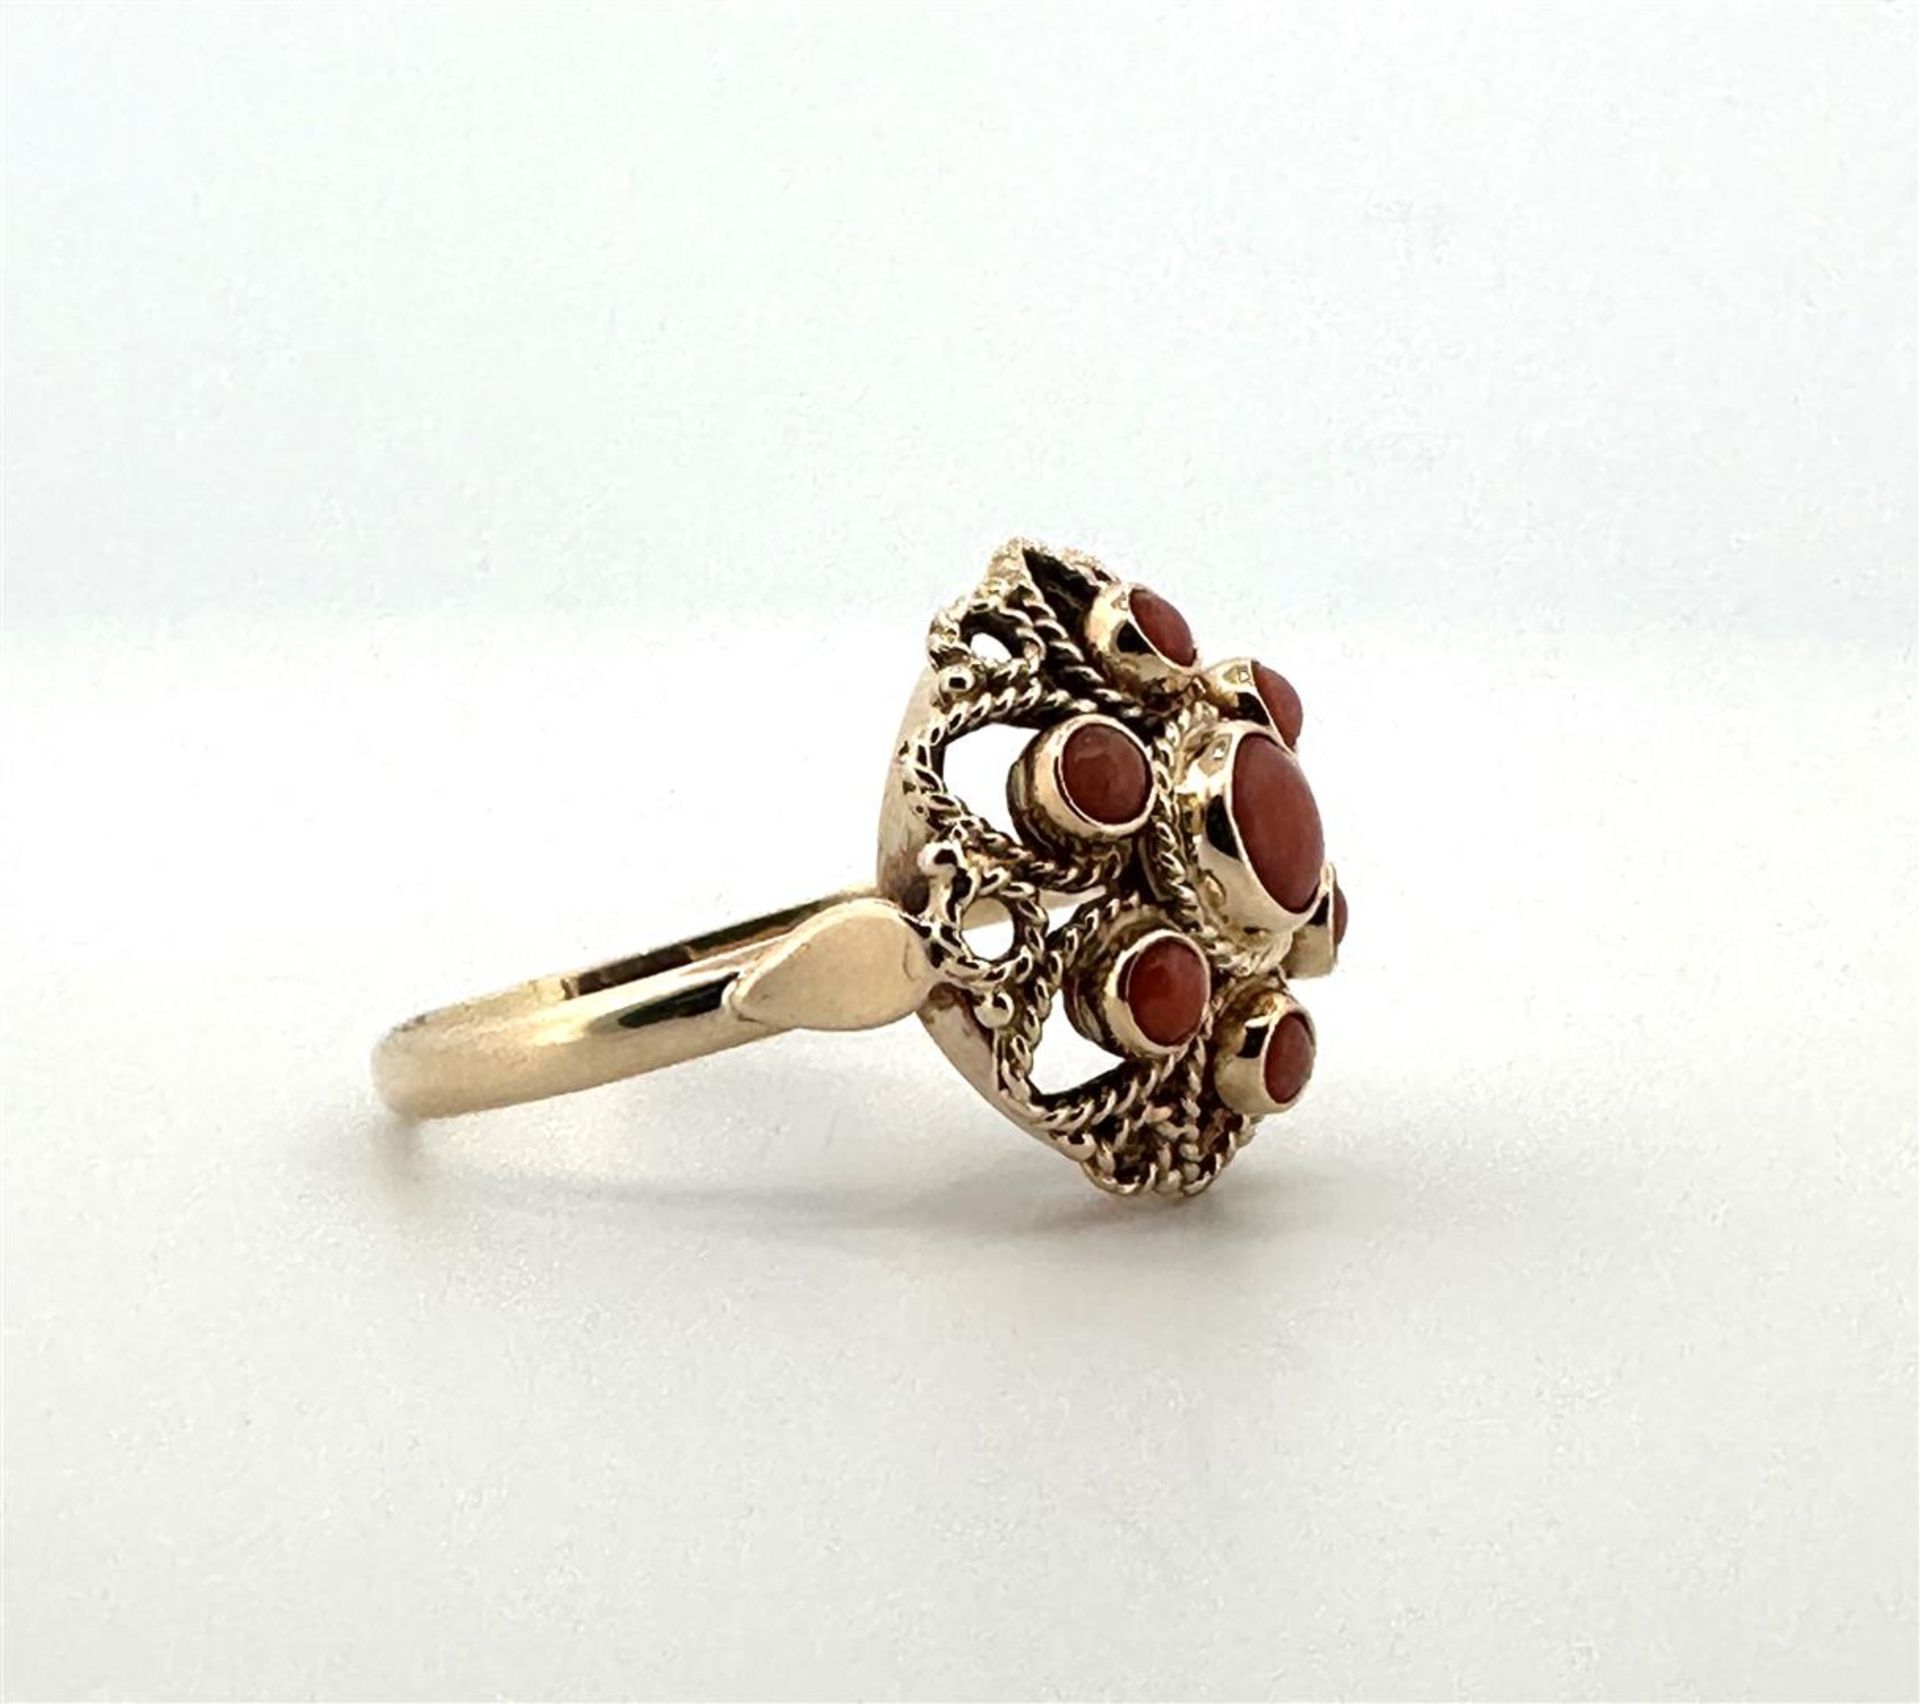 14kt rose gold rosette ring set with red coral.
The ring is gracefully finished with twisted wire an - Bild 4 aus 5